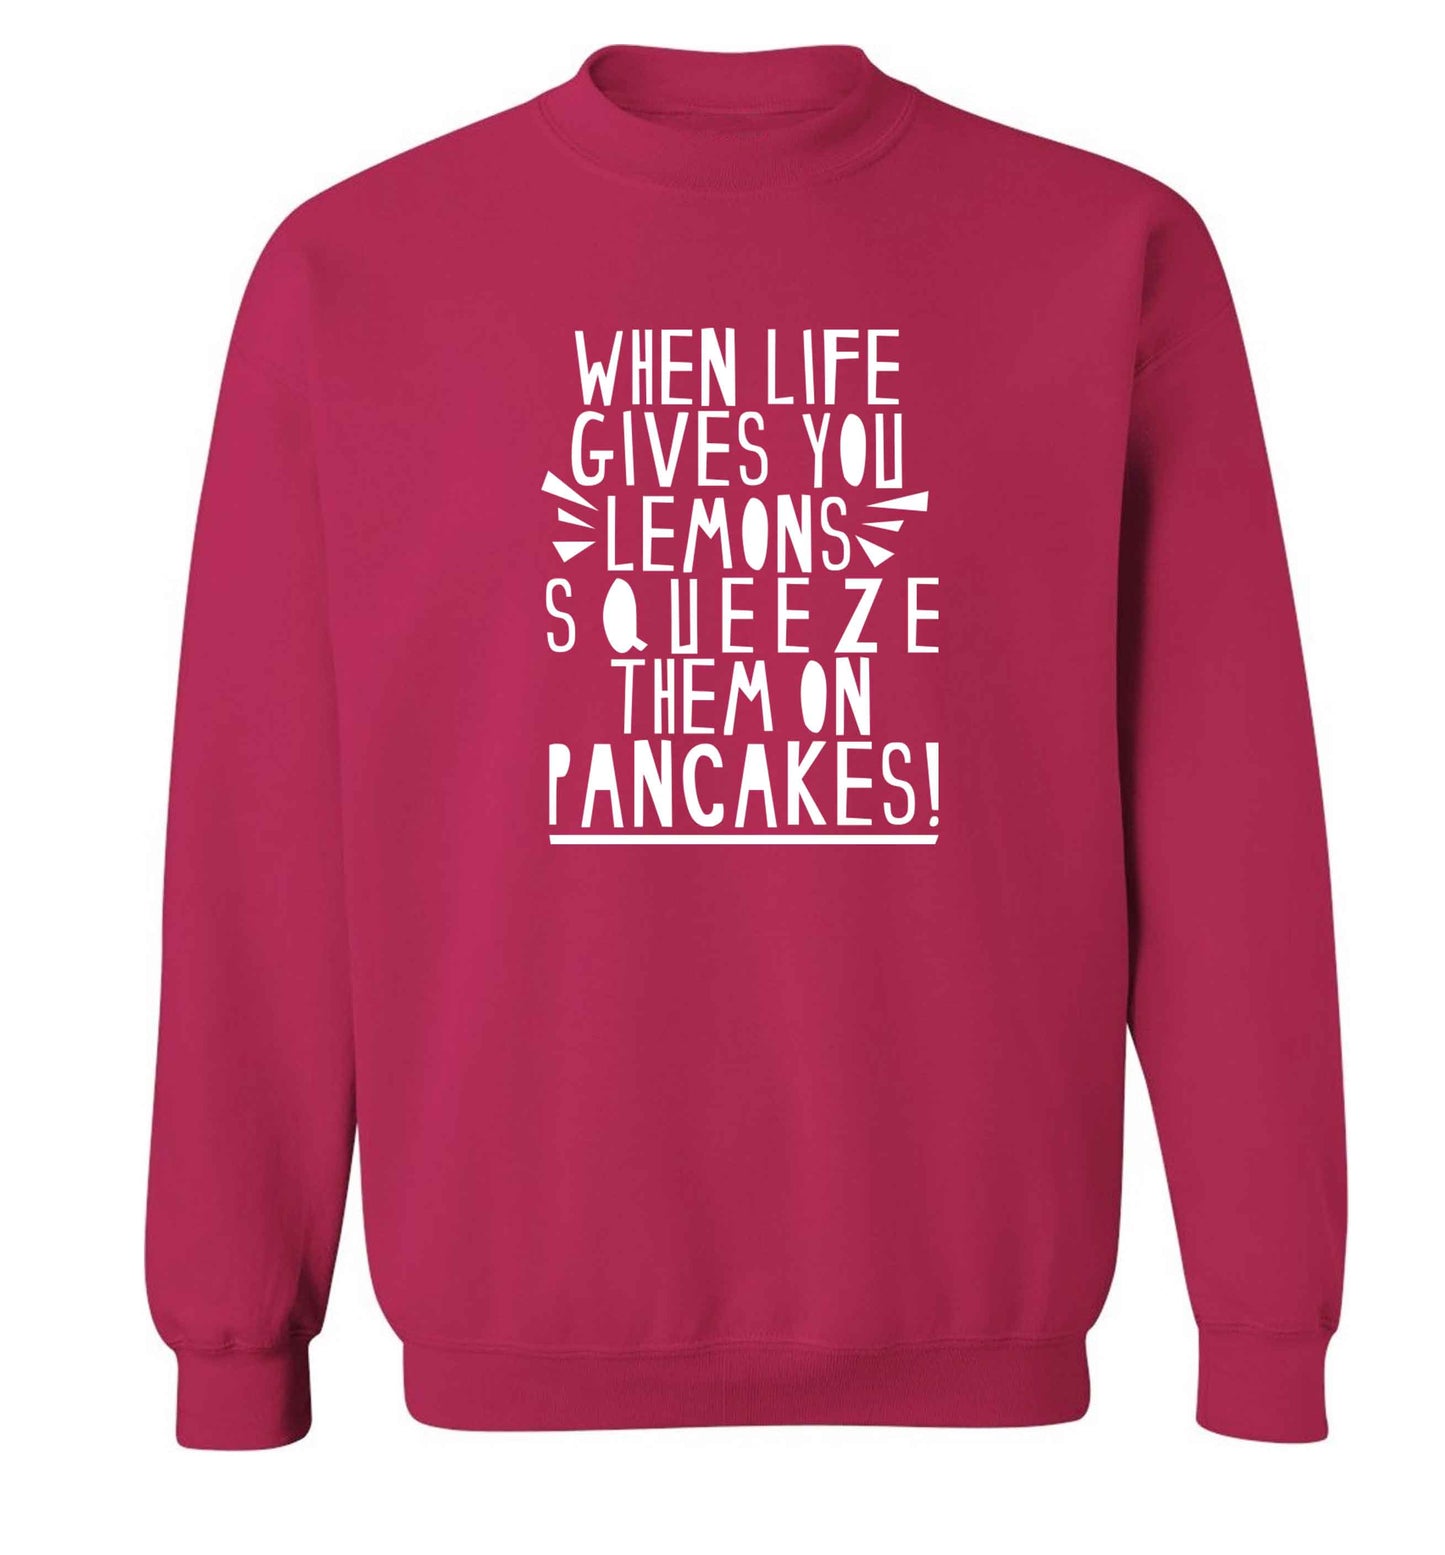 When life gives you lemons squeeze them on pancakes! adult's unisex pink sweater 2XL